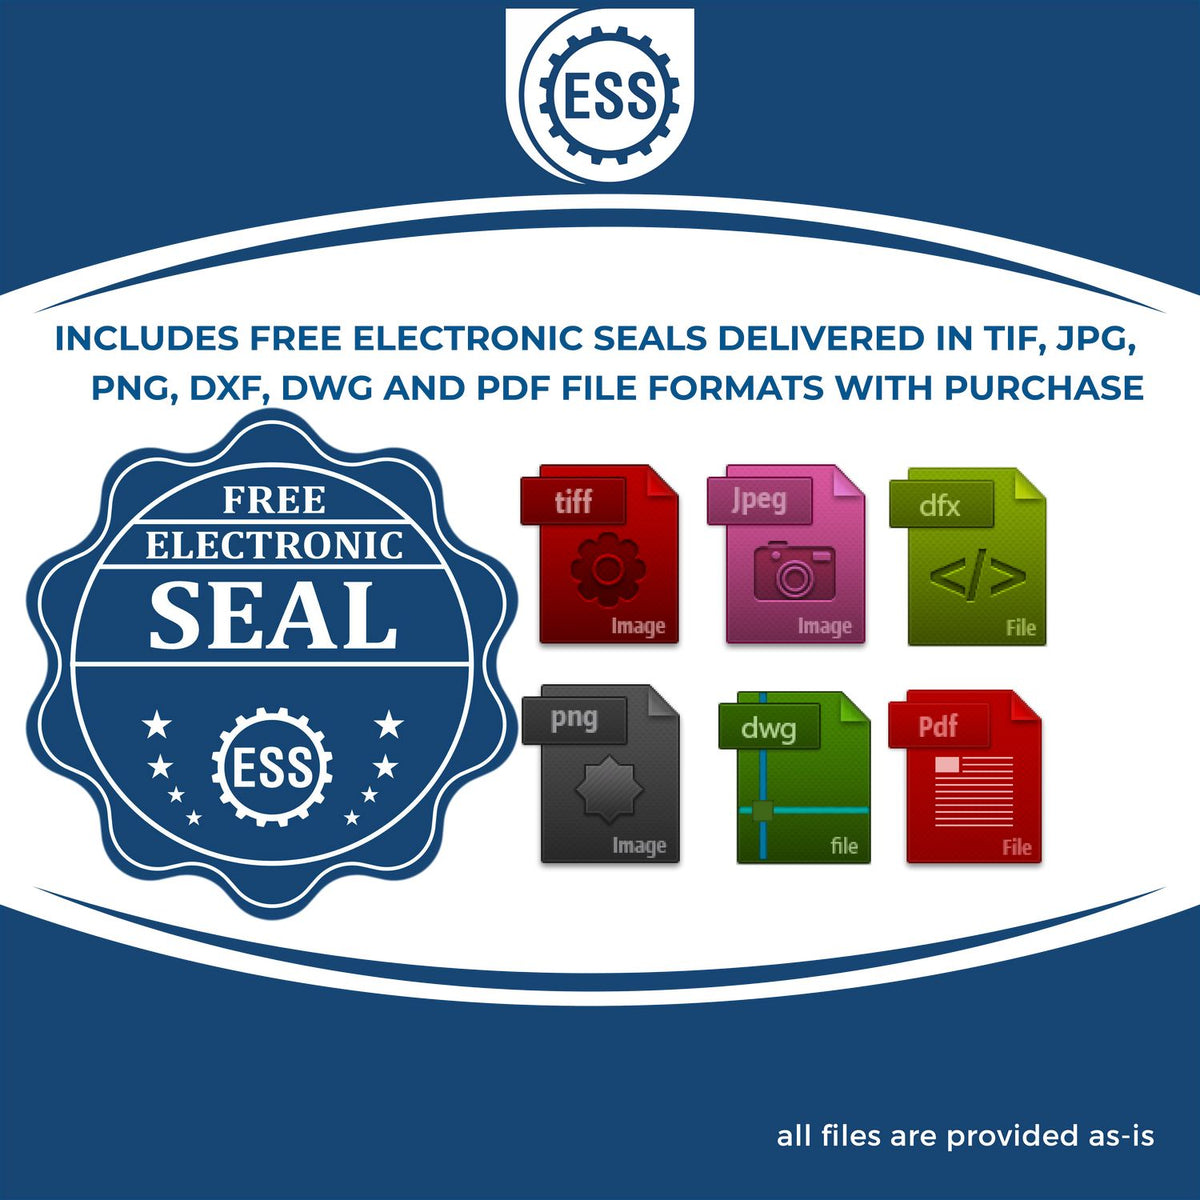 An infographic for the free electronic seal for the Slim Pre-Inked State Seal Notary Stamp for Michigan illustrating the different file type icons such as DXF, DWG, TIF, JPG and PNG.